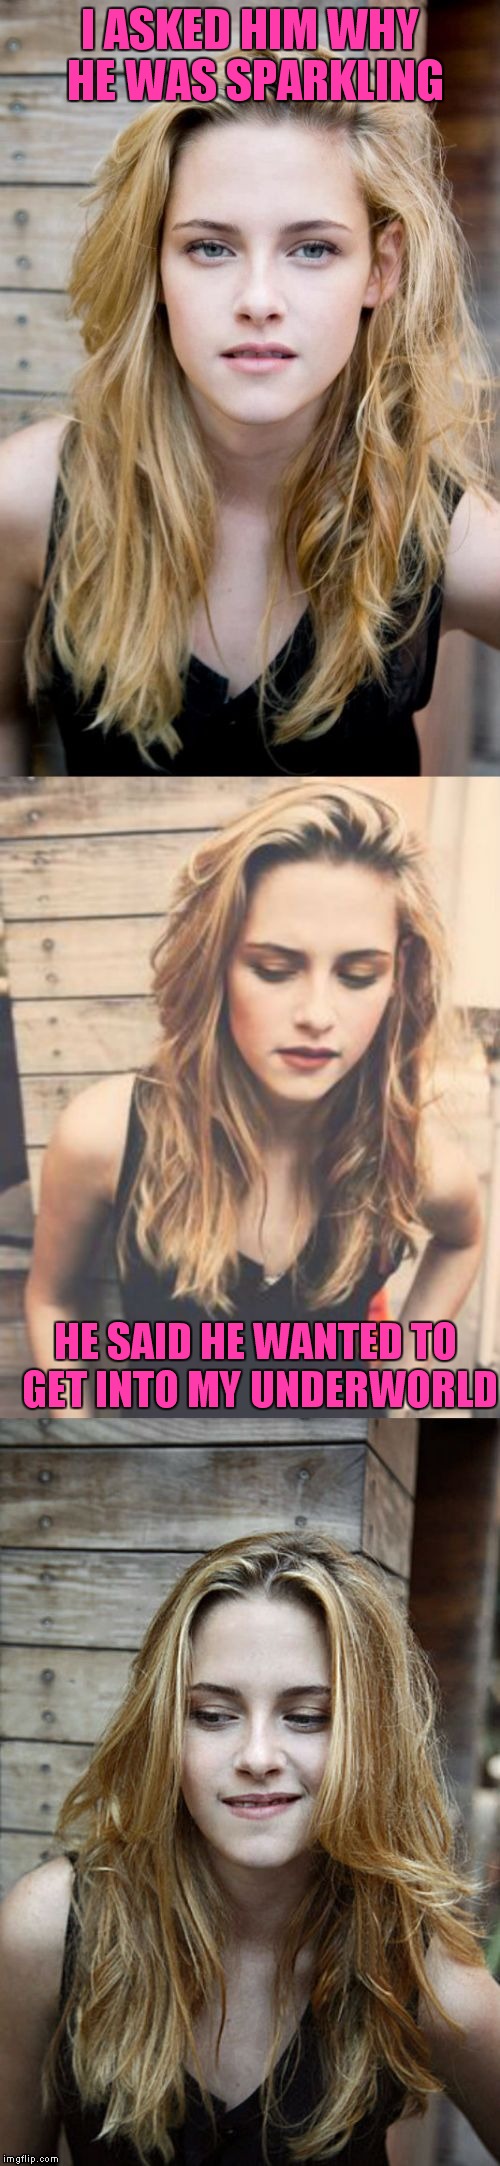 Bad Pun Kristen Stewart 2 | I ASKED HIM WHY HE WAS SPARKLING HE SAID HE WANTED TO GET INTO MY UNDERWORLD | image tagged in bad pun kristen stewart 2 | made w/ Imgflip meme maker